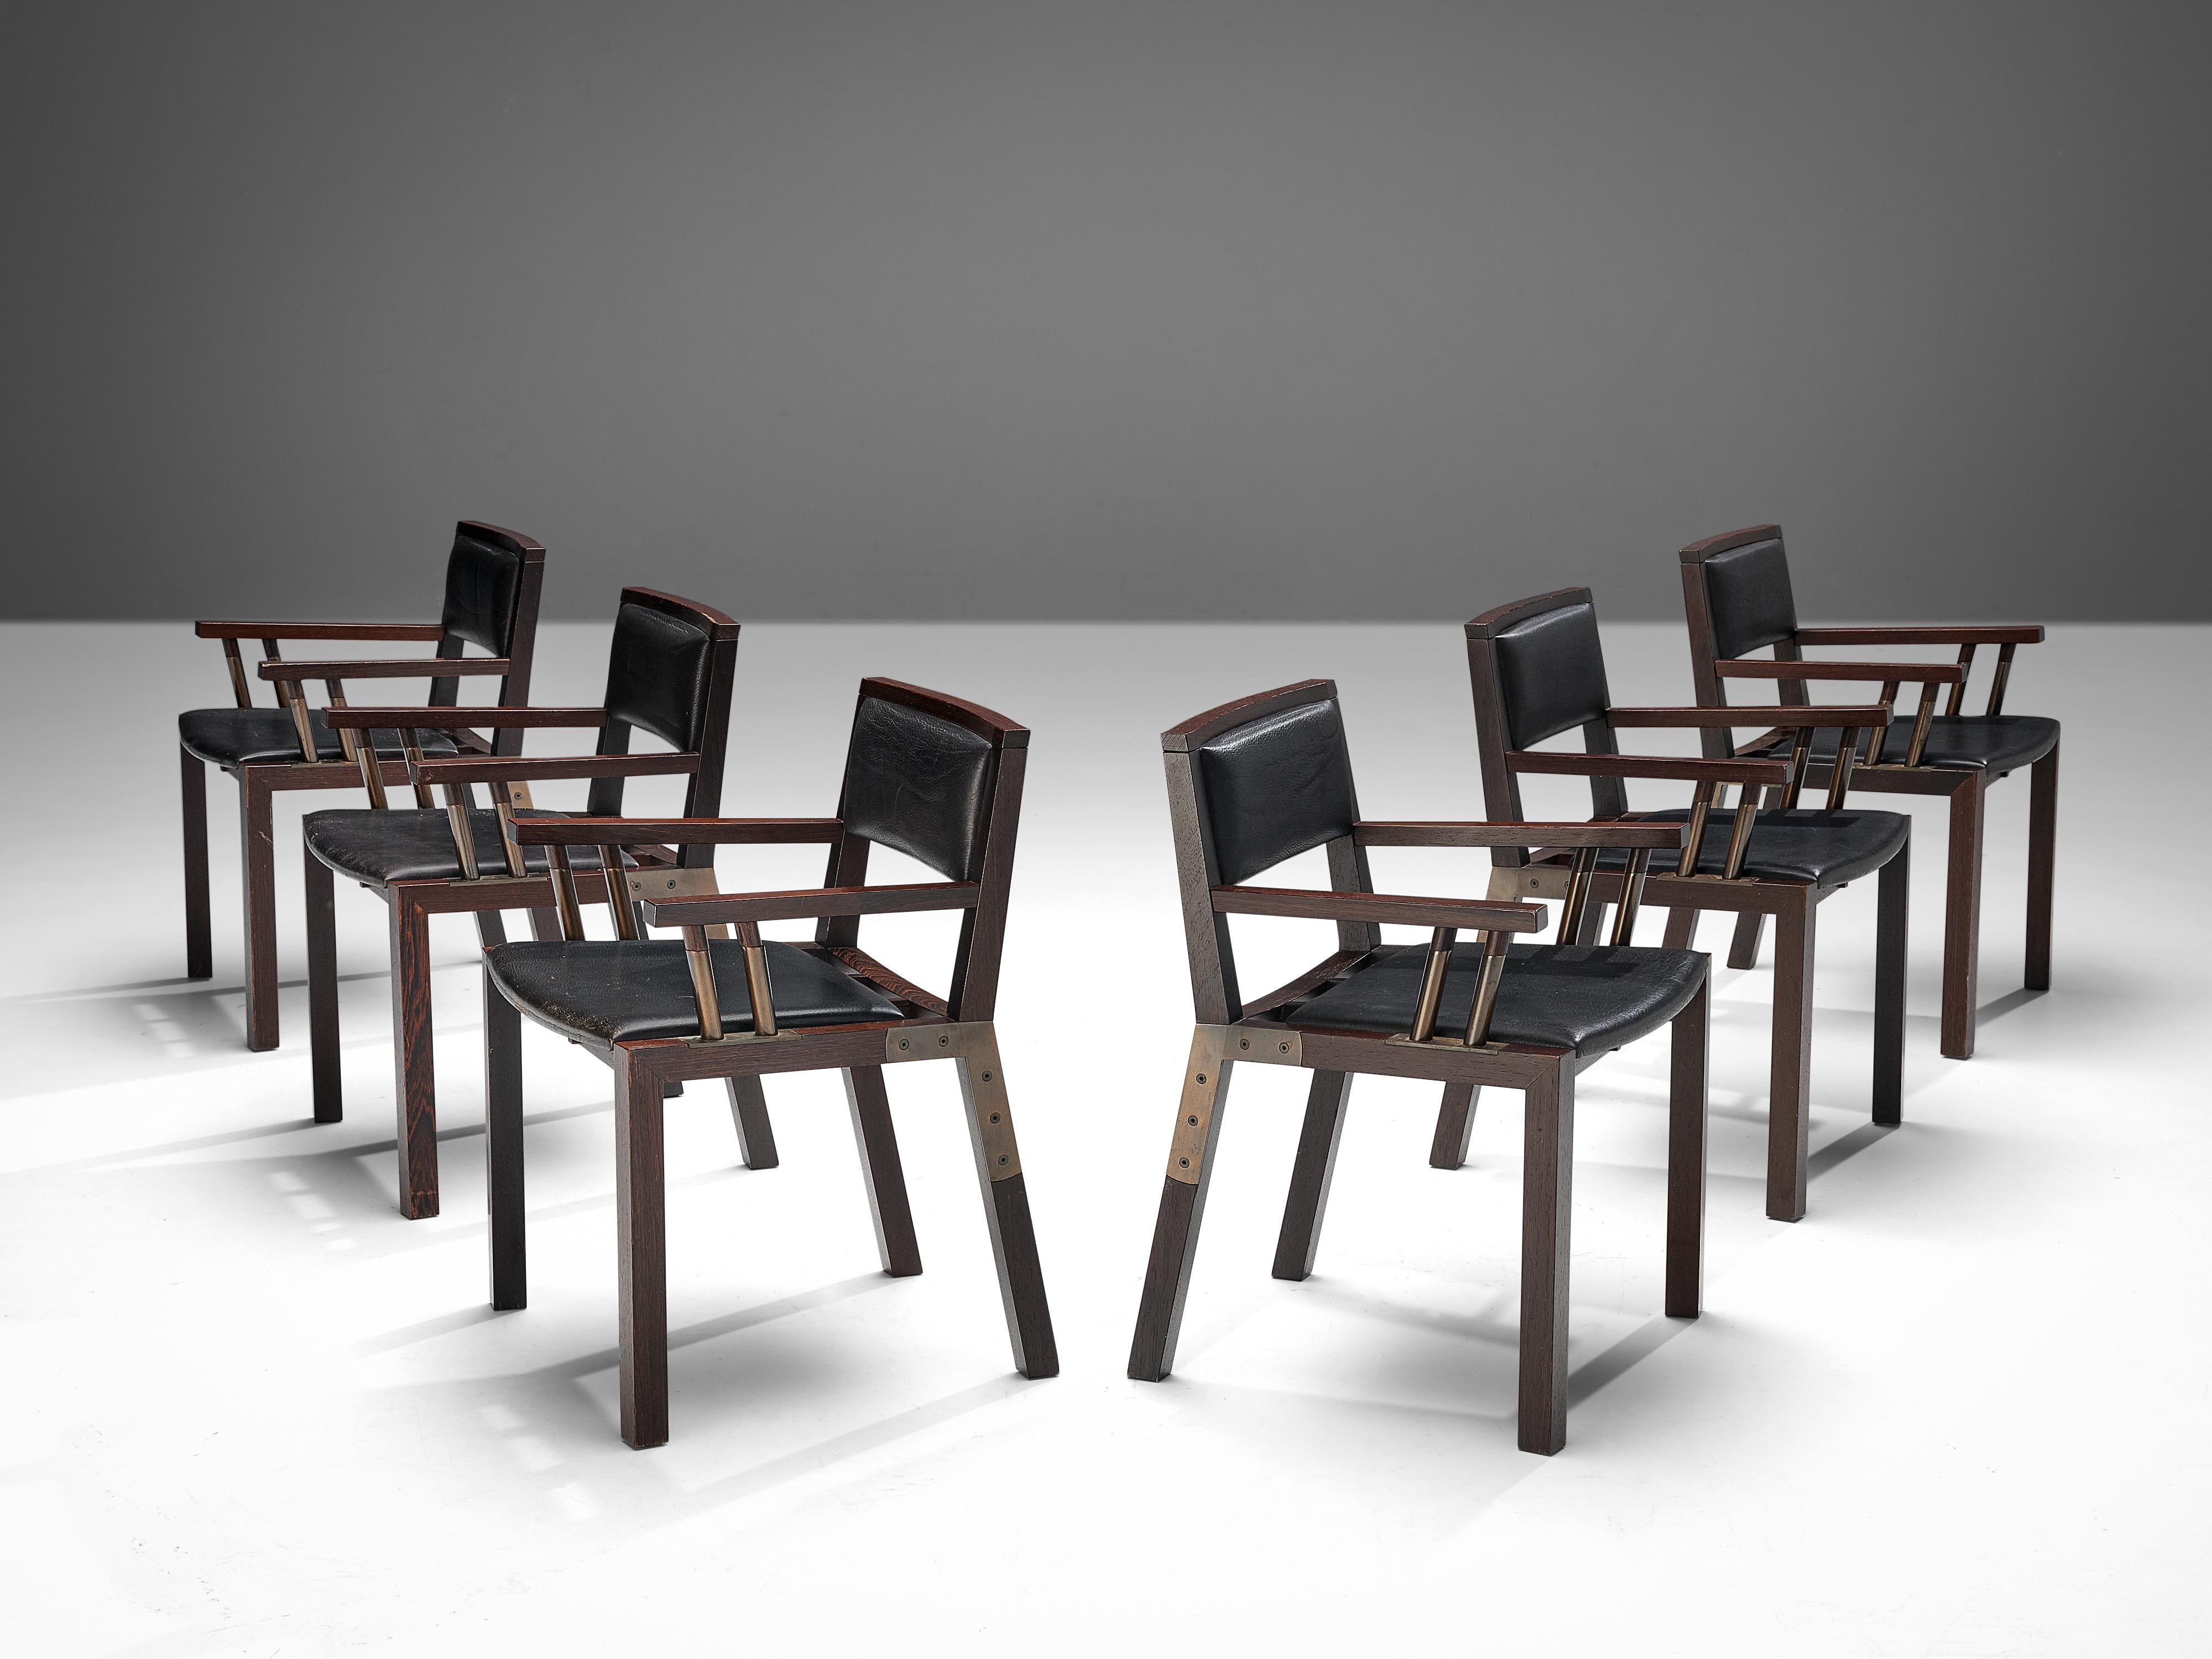 Jean-Michel Wilmotte for Tecno, set of six dining chairs model ‘Grand Louvre’, wenge, leather, Italy, circa 1989 

These extremely rare dining chairs are designed by the renowned French architect Jean-Michel Wilmotte and commissioned by the Parisian